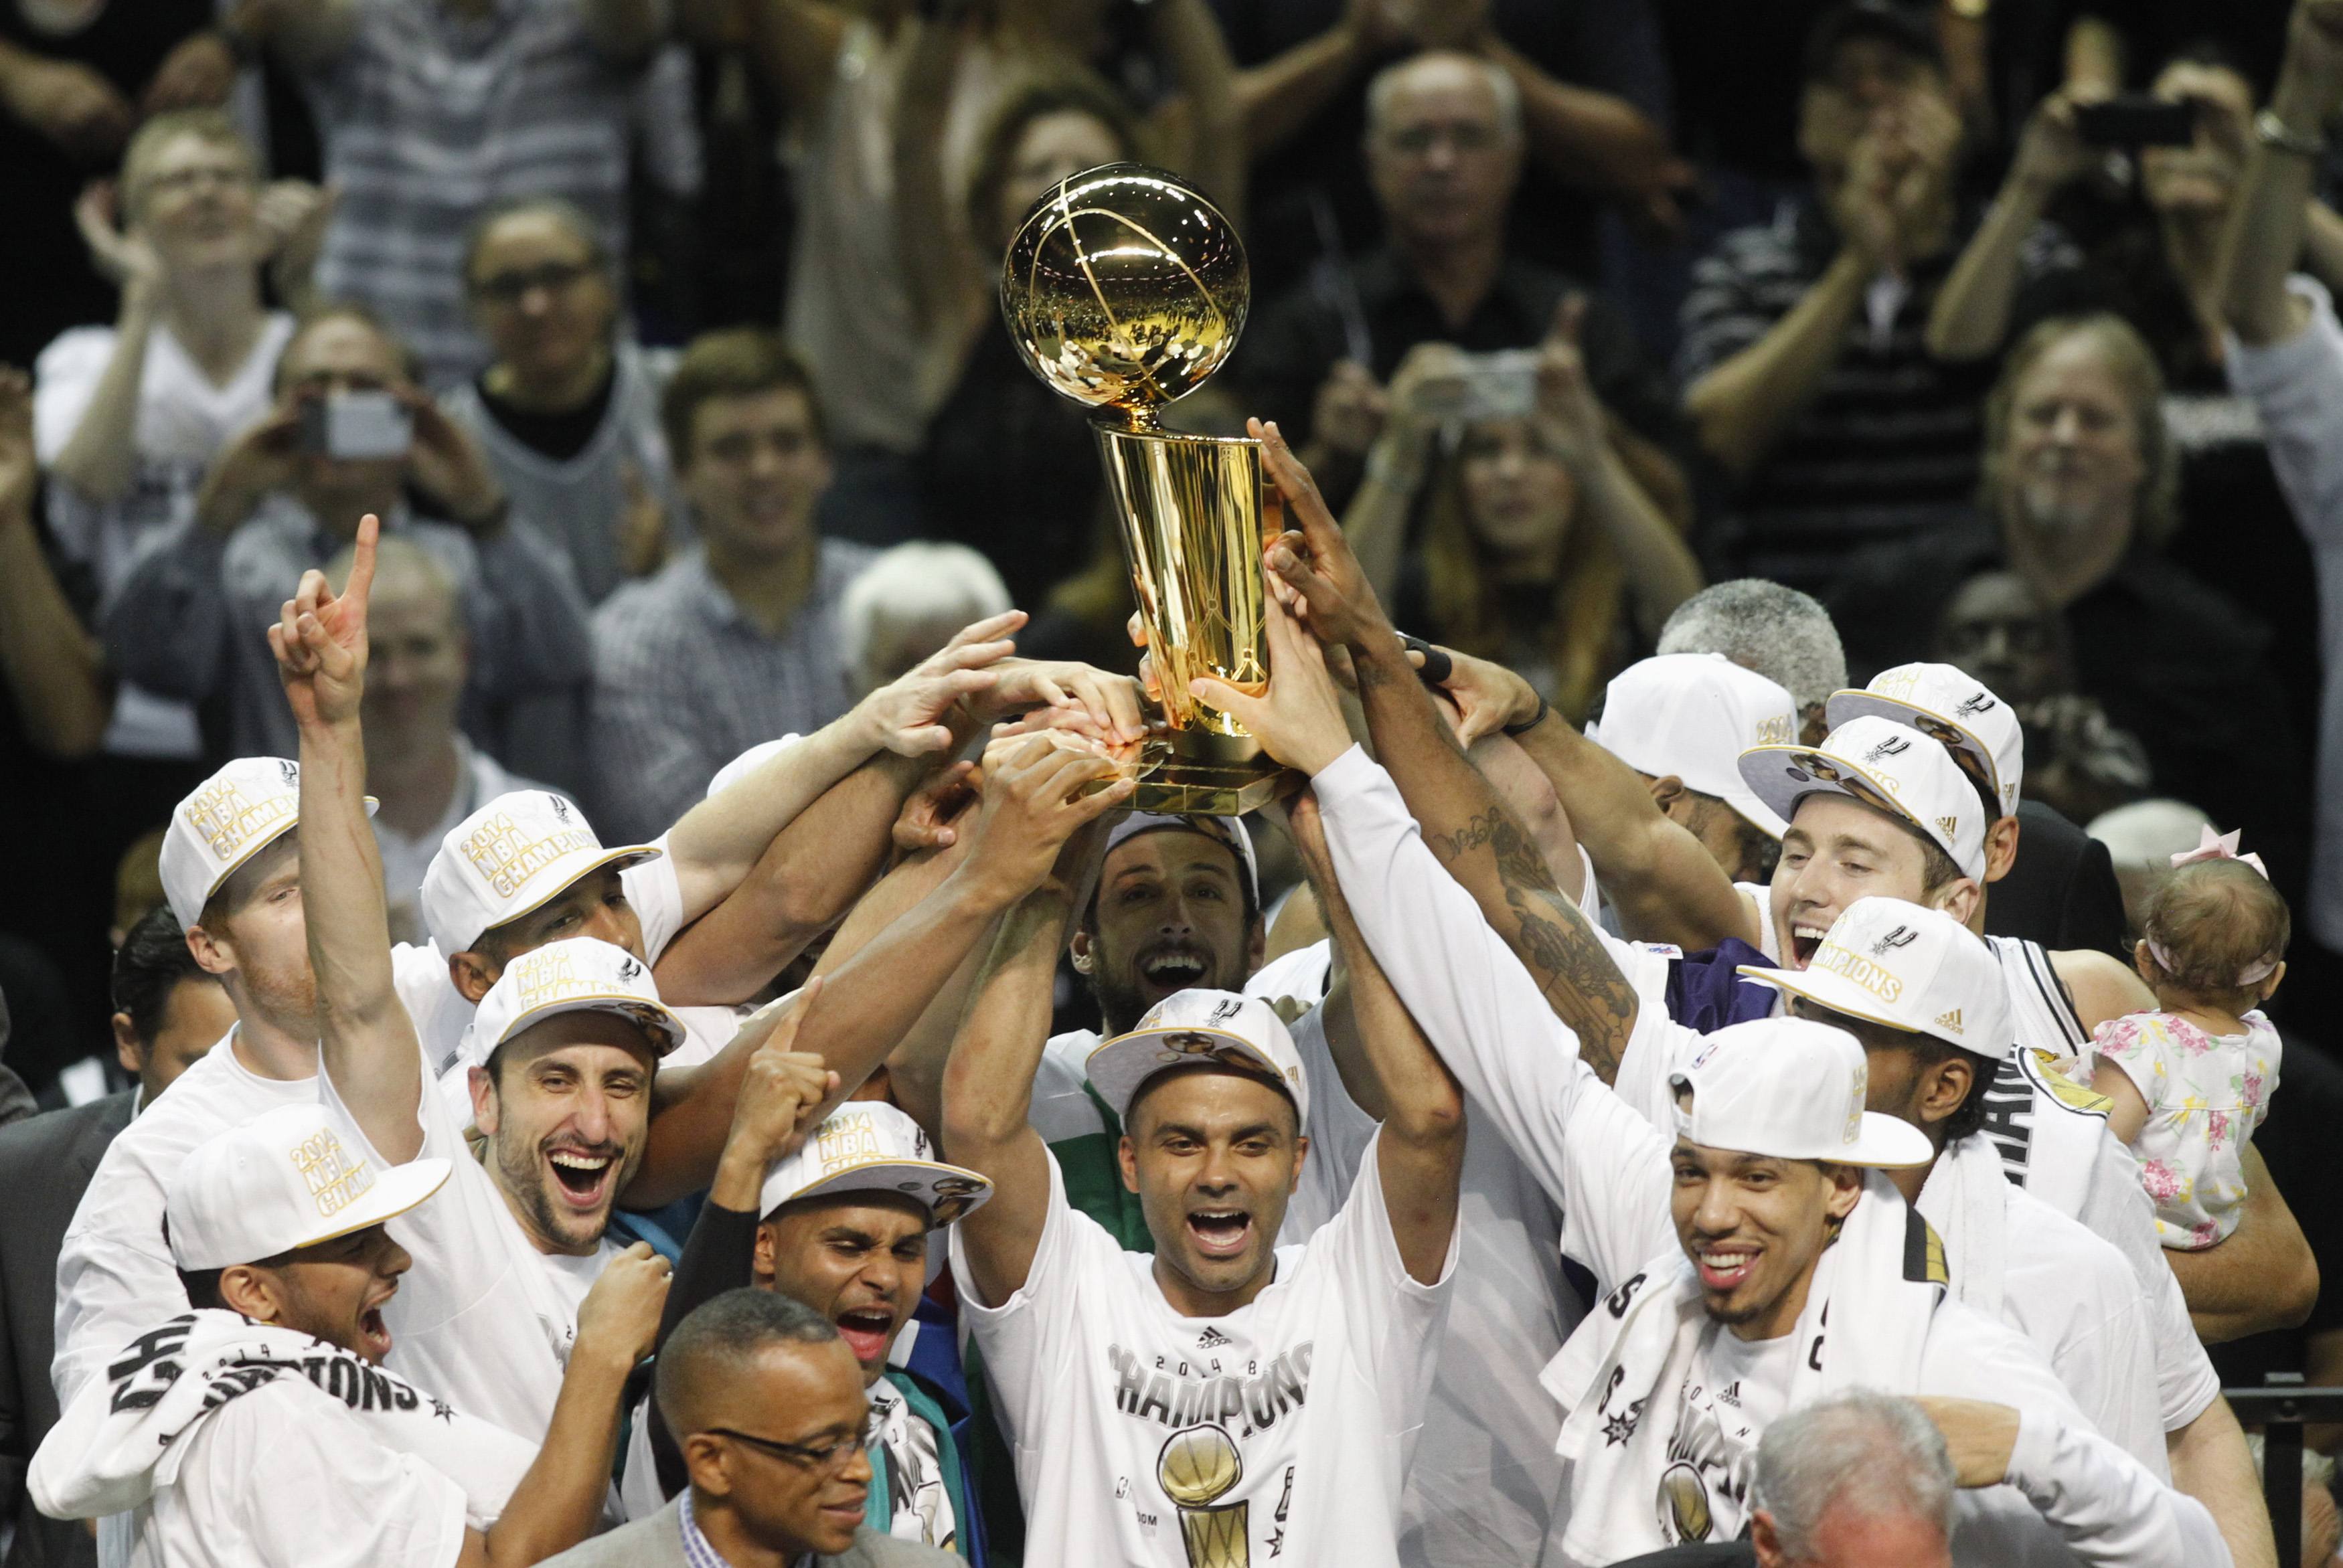 The San Antonio Spurs defeated the Miami Heat in the NBA Finals last year. Photo: Reuters